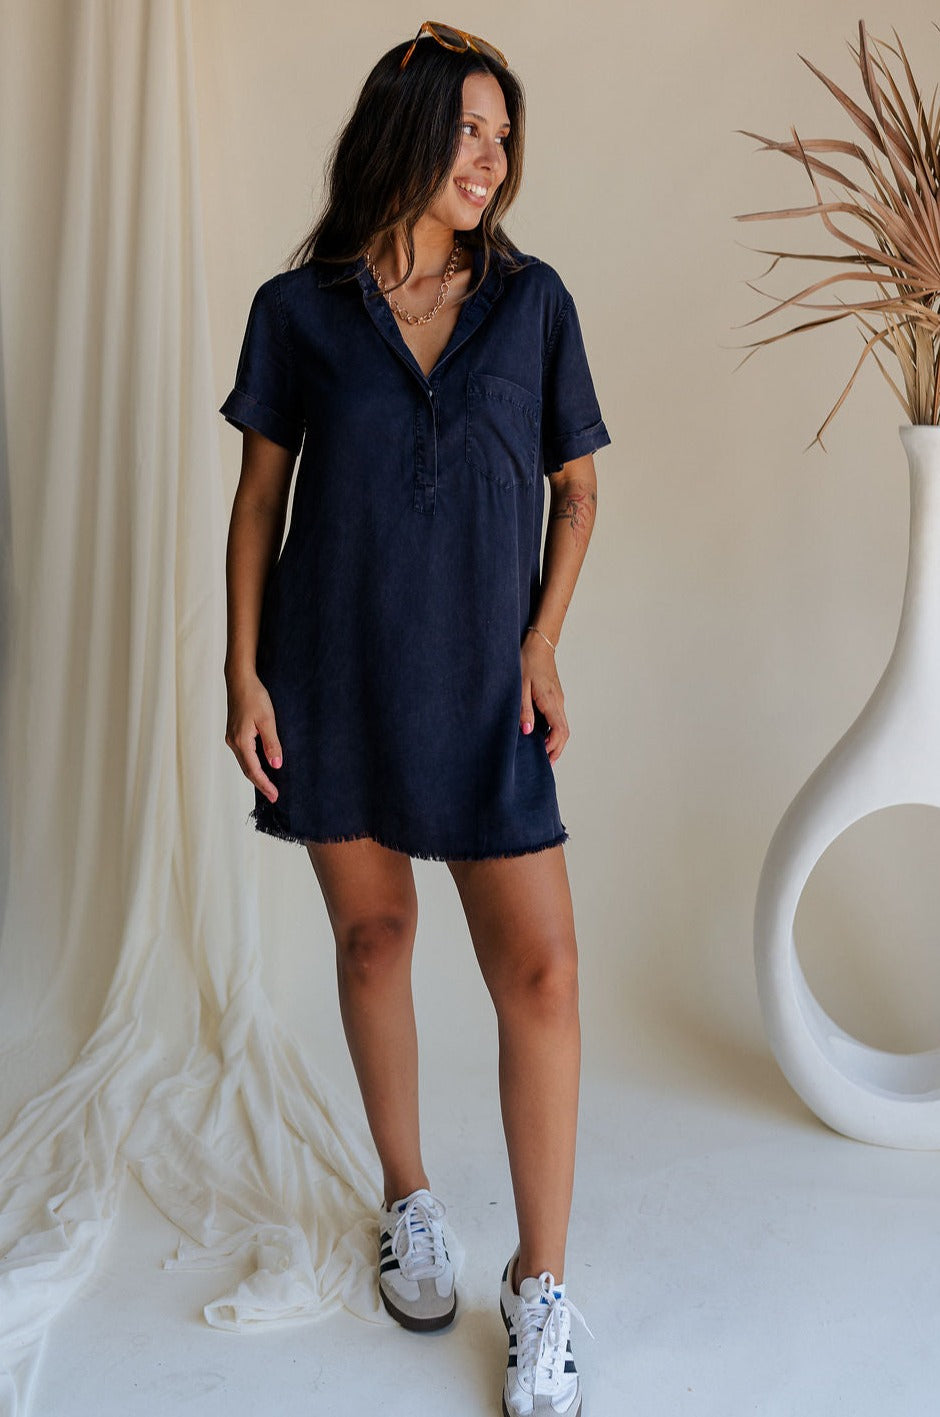 full boduy view of female model wearing the Leighton Navy Fray Short Sleeve Mini Dress which featuresNavy Blue Tencel Fabric, Fray Hem Details, Mini Length, Quarter Button-Up Closure, Collared Neckline, Short Sleeves and Left Front Chest Pocket